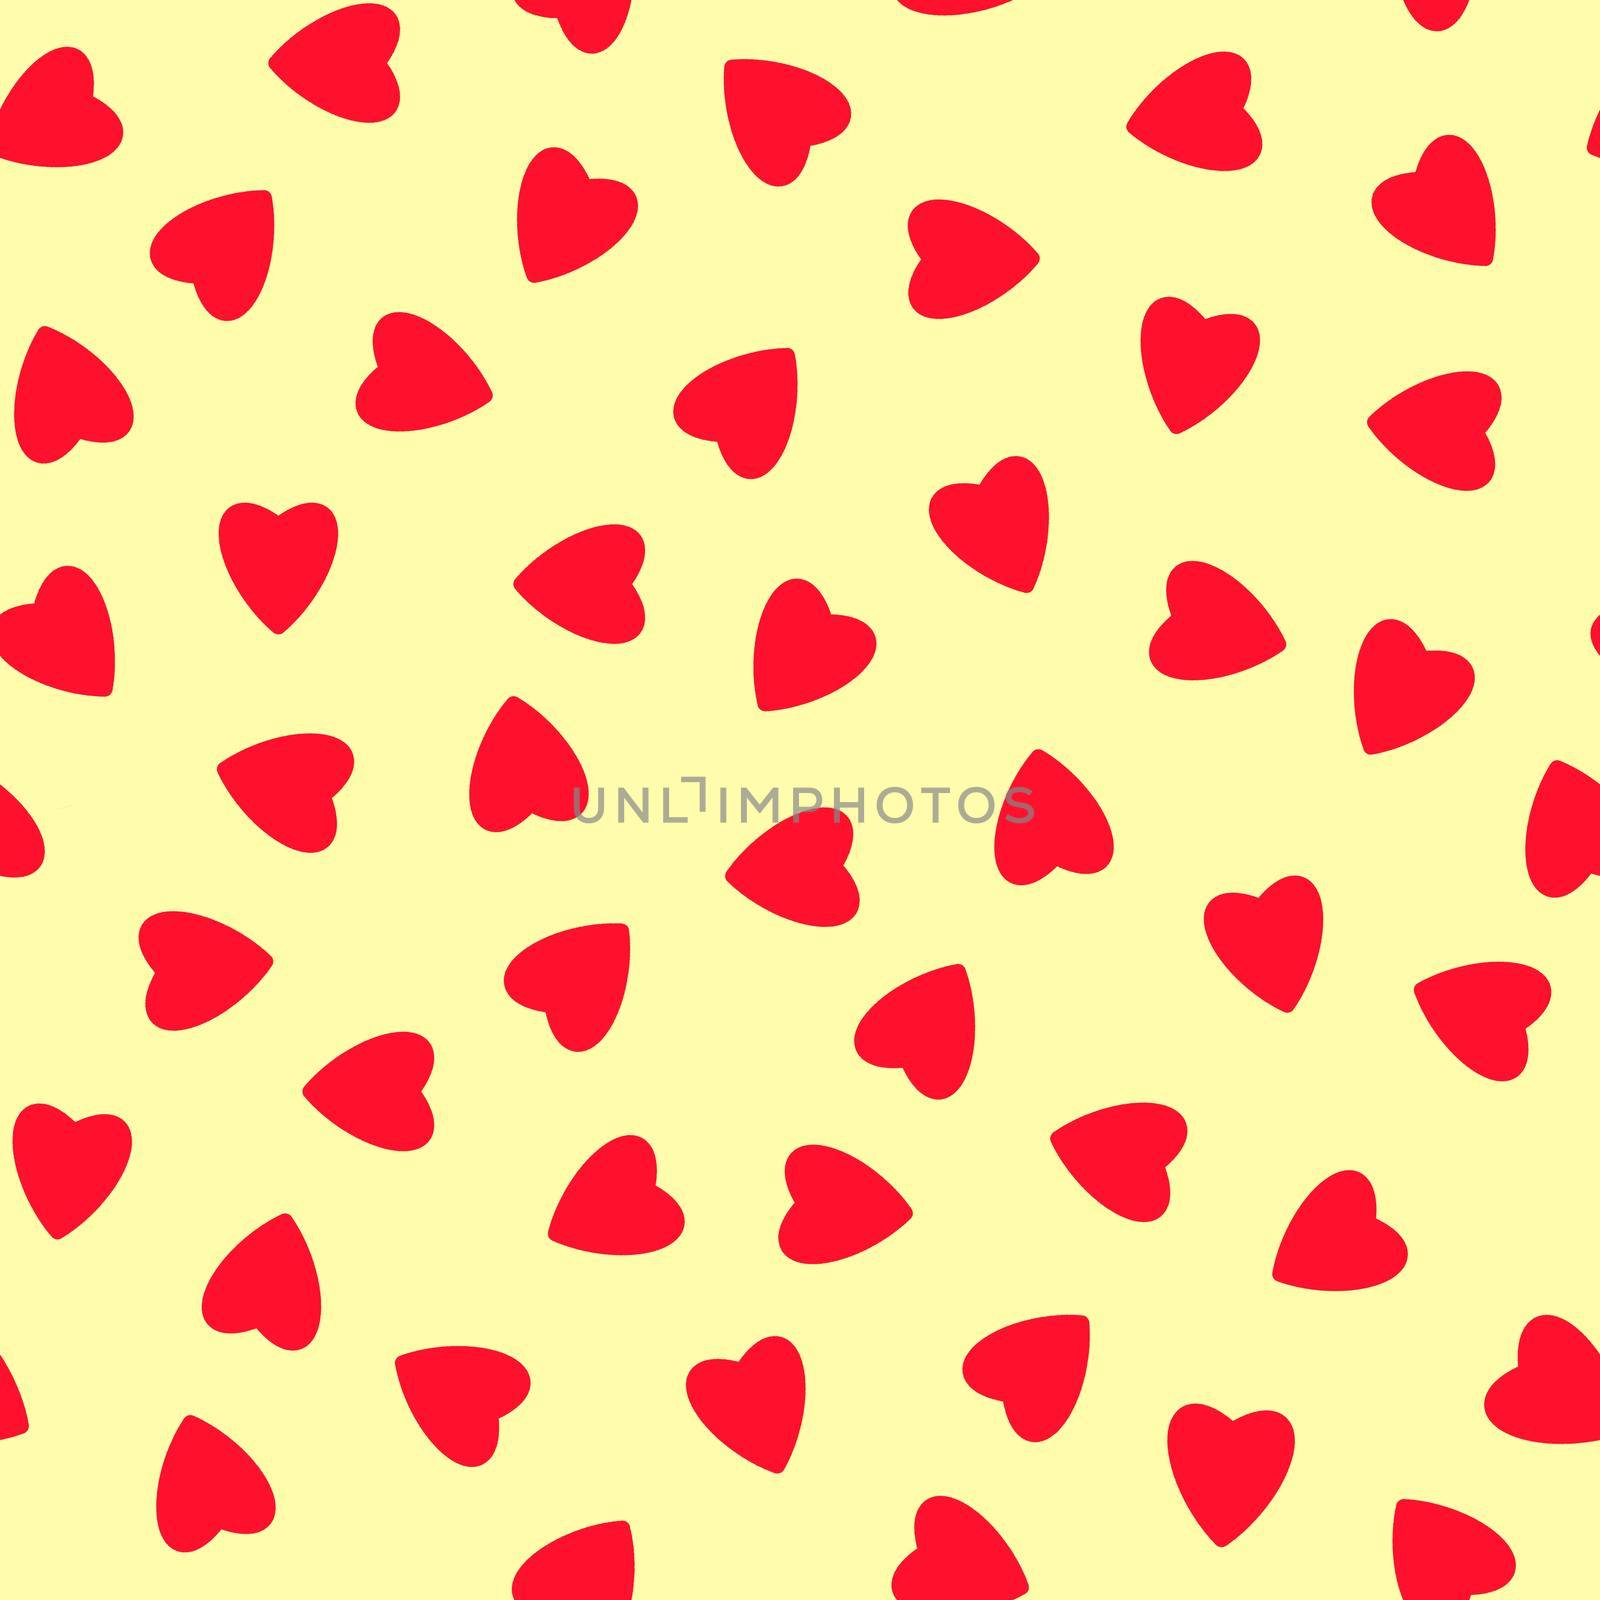 Simple hearts seamless pattern,endless chaotic texture made of tiny heart silhouettes.Valentines,mothers day background.Great for Easter,wedding,scrapbook,gift wrapping paper,textiles.Red on Ivory. by Angelsmoon